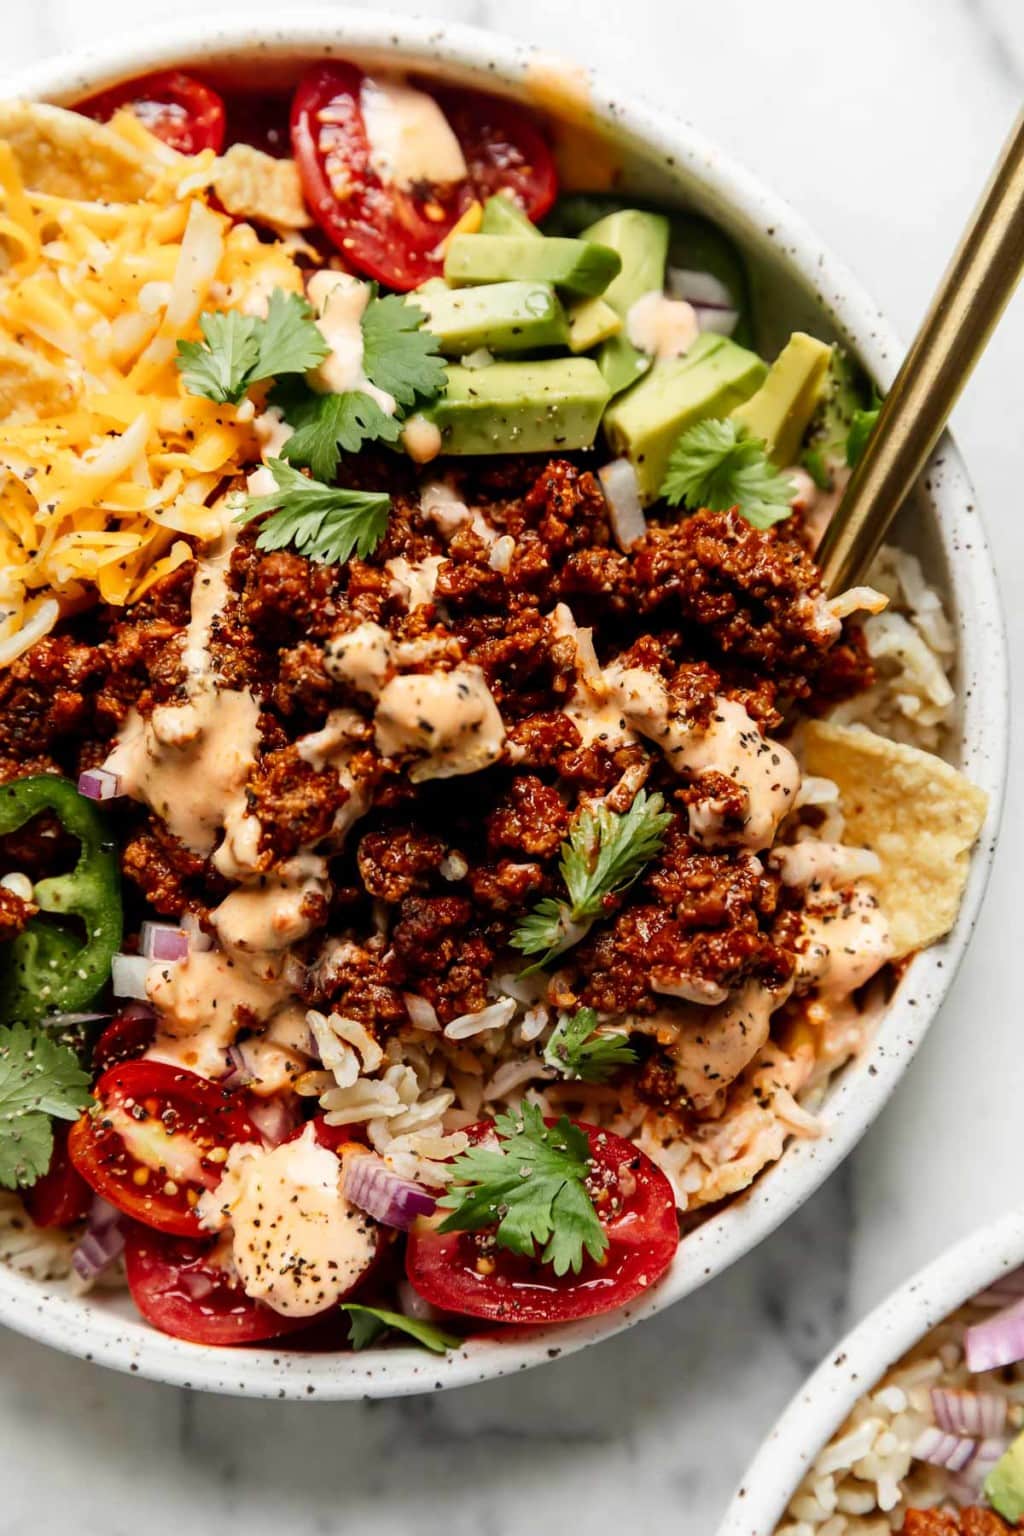 Easy Beef Taco Bowl with Salsa Ranch - The Real Food Dietitians